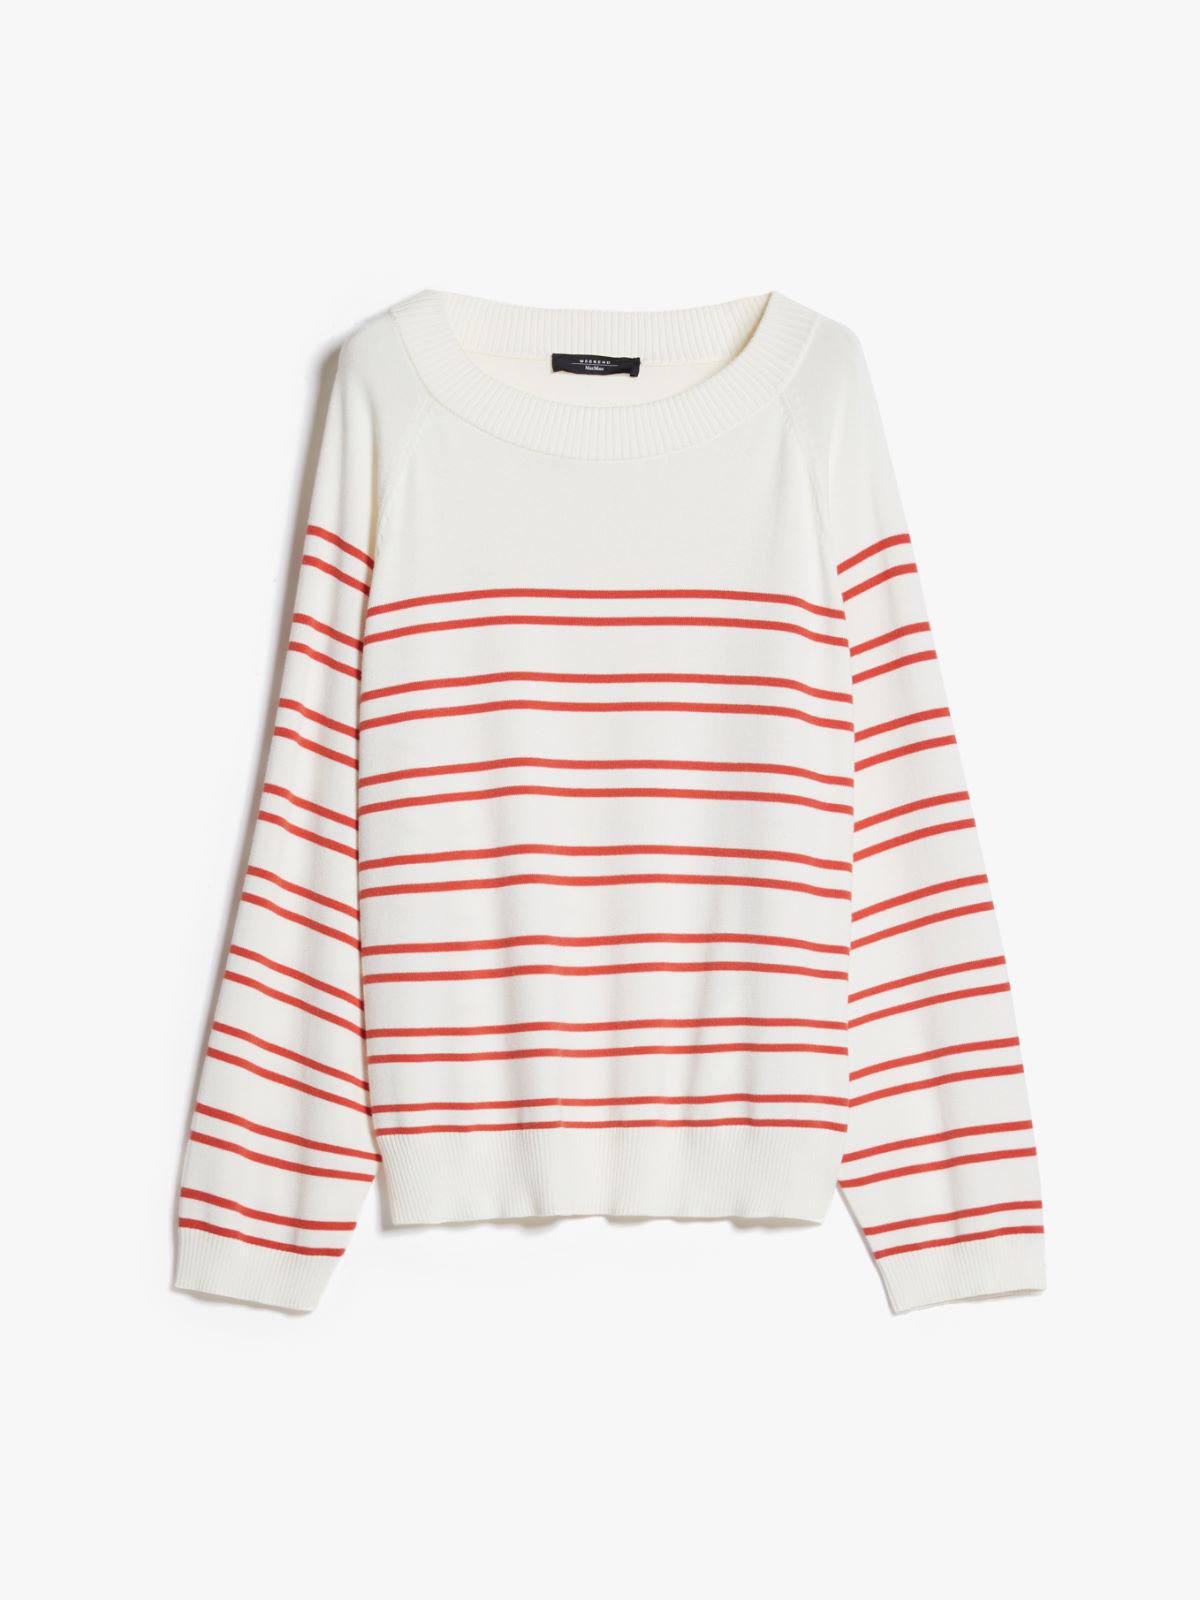 Oversized sweater - RED - Weekend Max Mara - 6